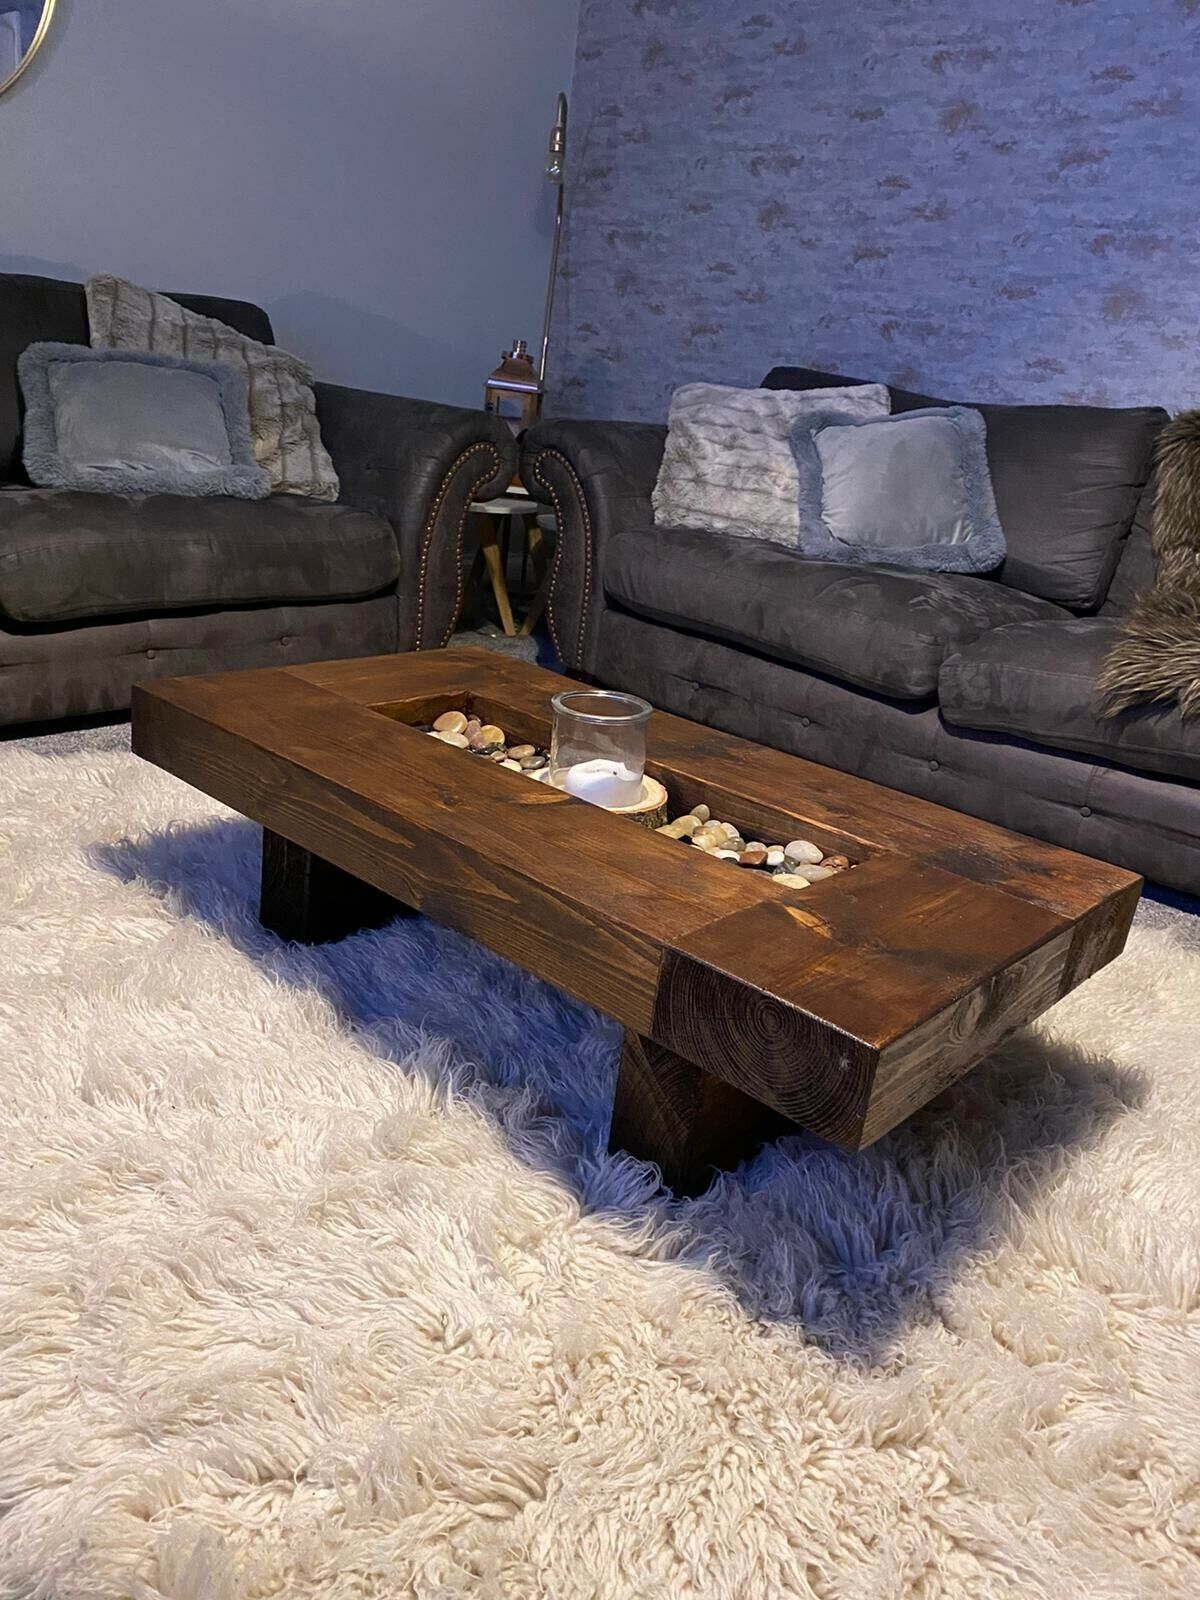 Rustic Handmade Solid Wood Sleeper Coffee Table Xtra Large | Ebay Within Rustic Wood Coffee Tables (View 3 of 15)